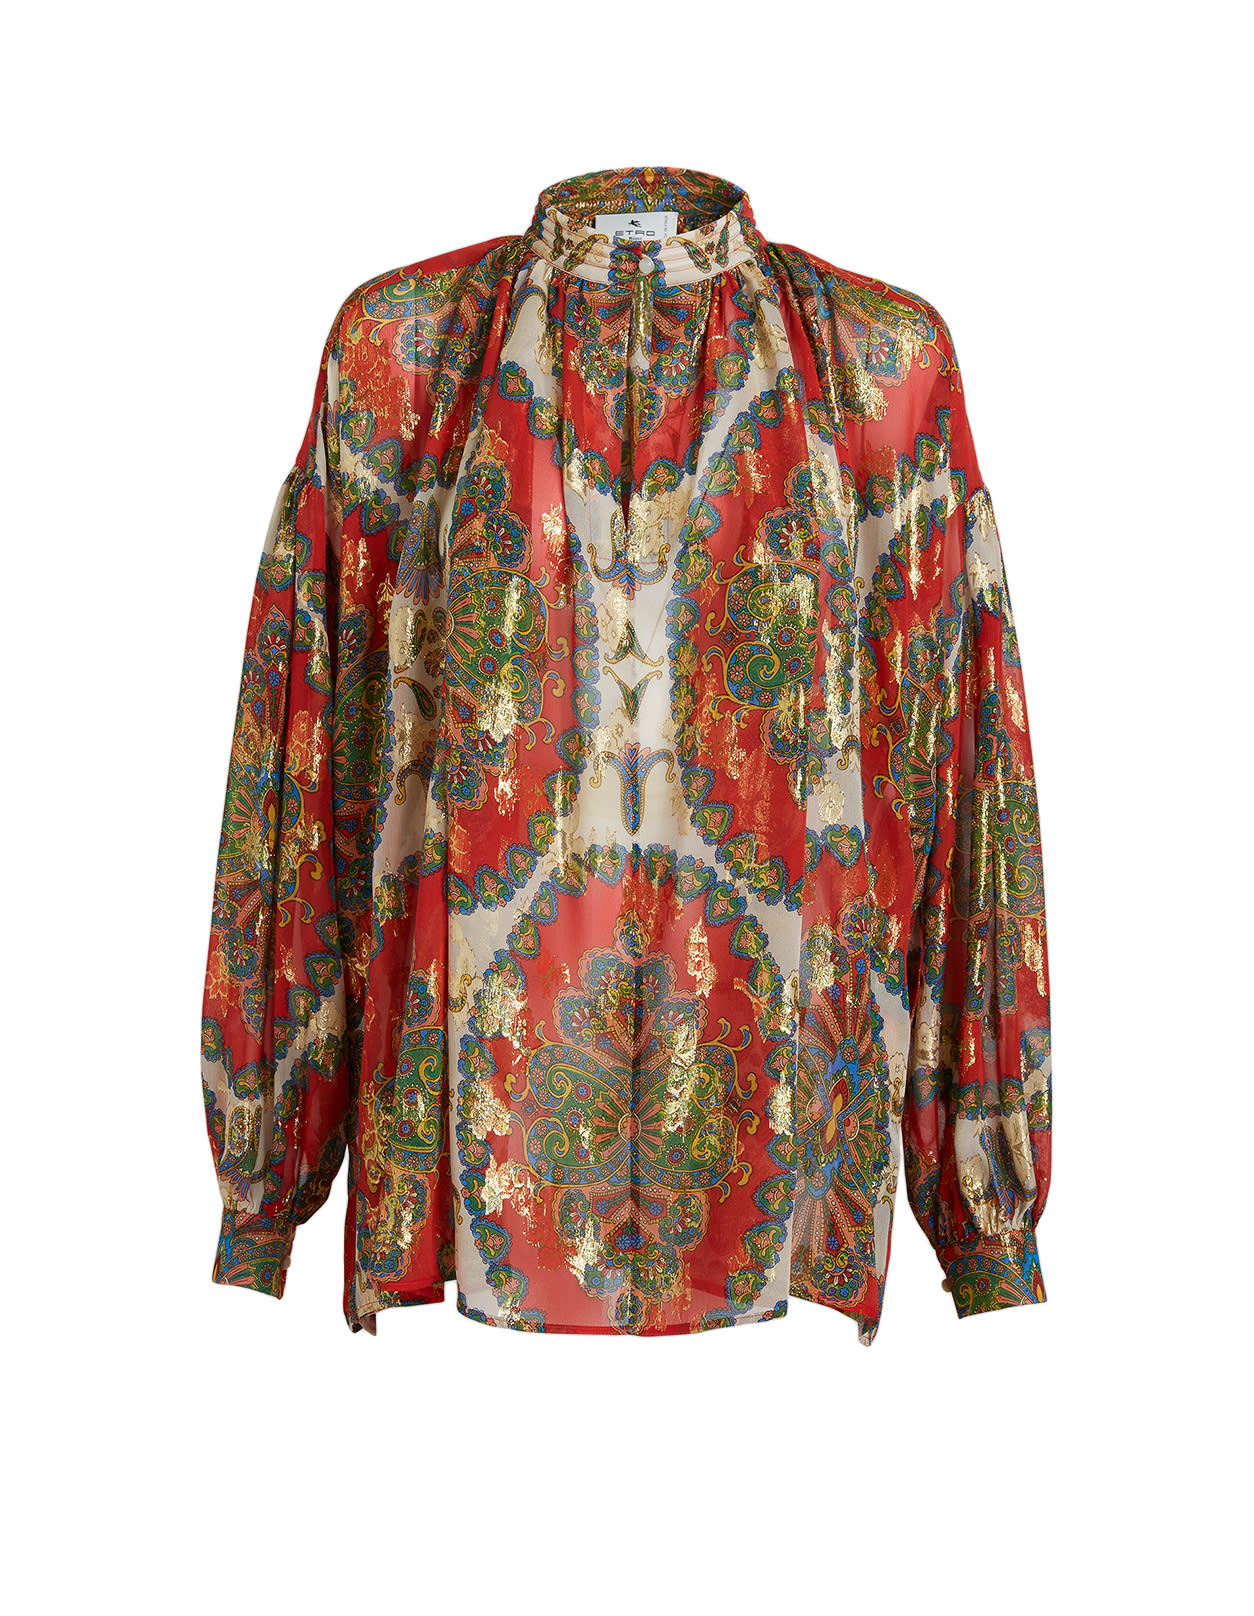 Etro Woman Silk Blouse With Gold Embroidery And Paisley Medallion Print